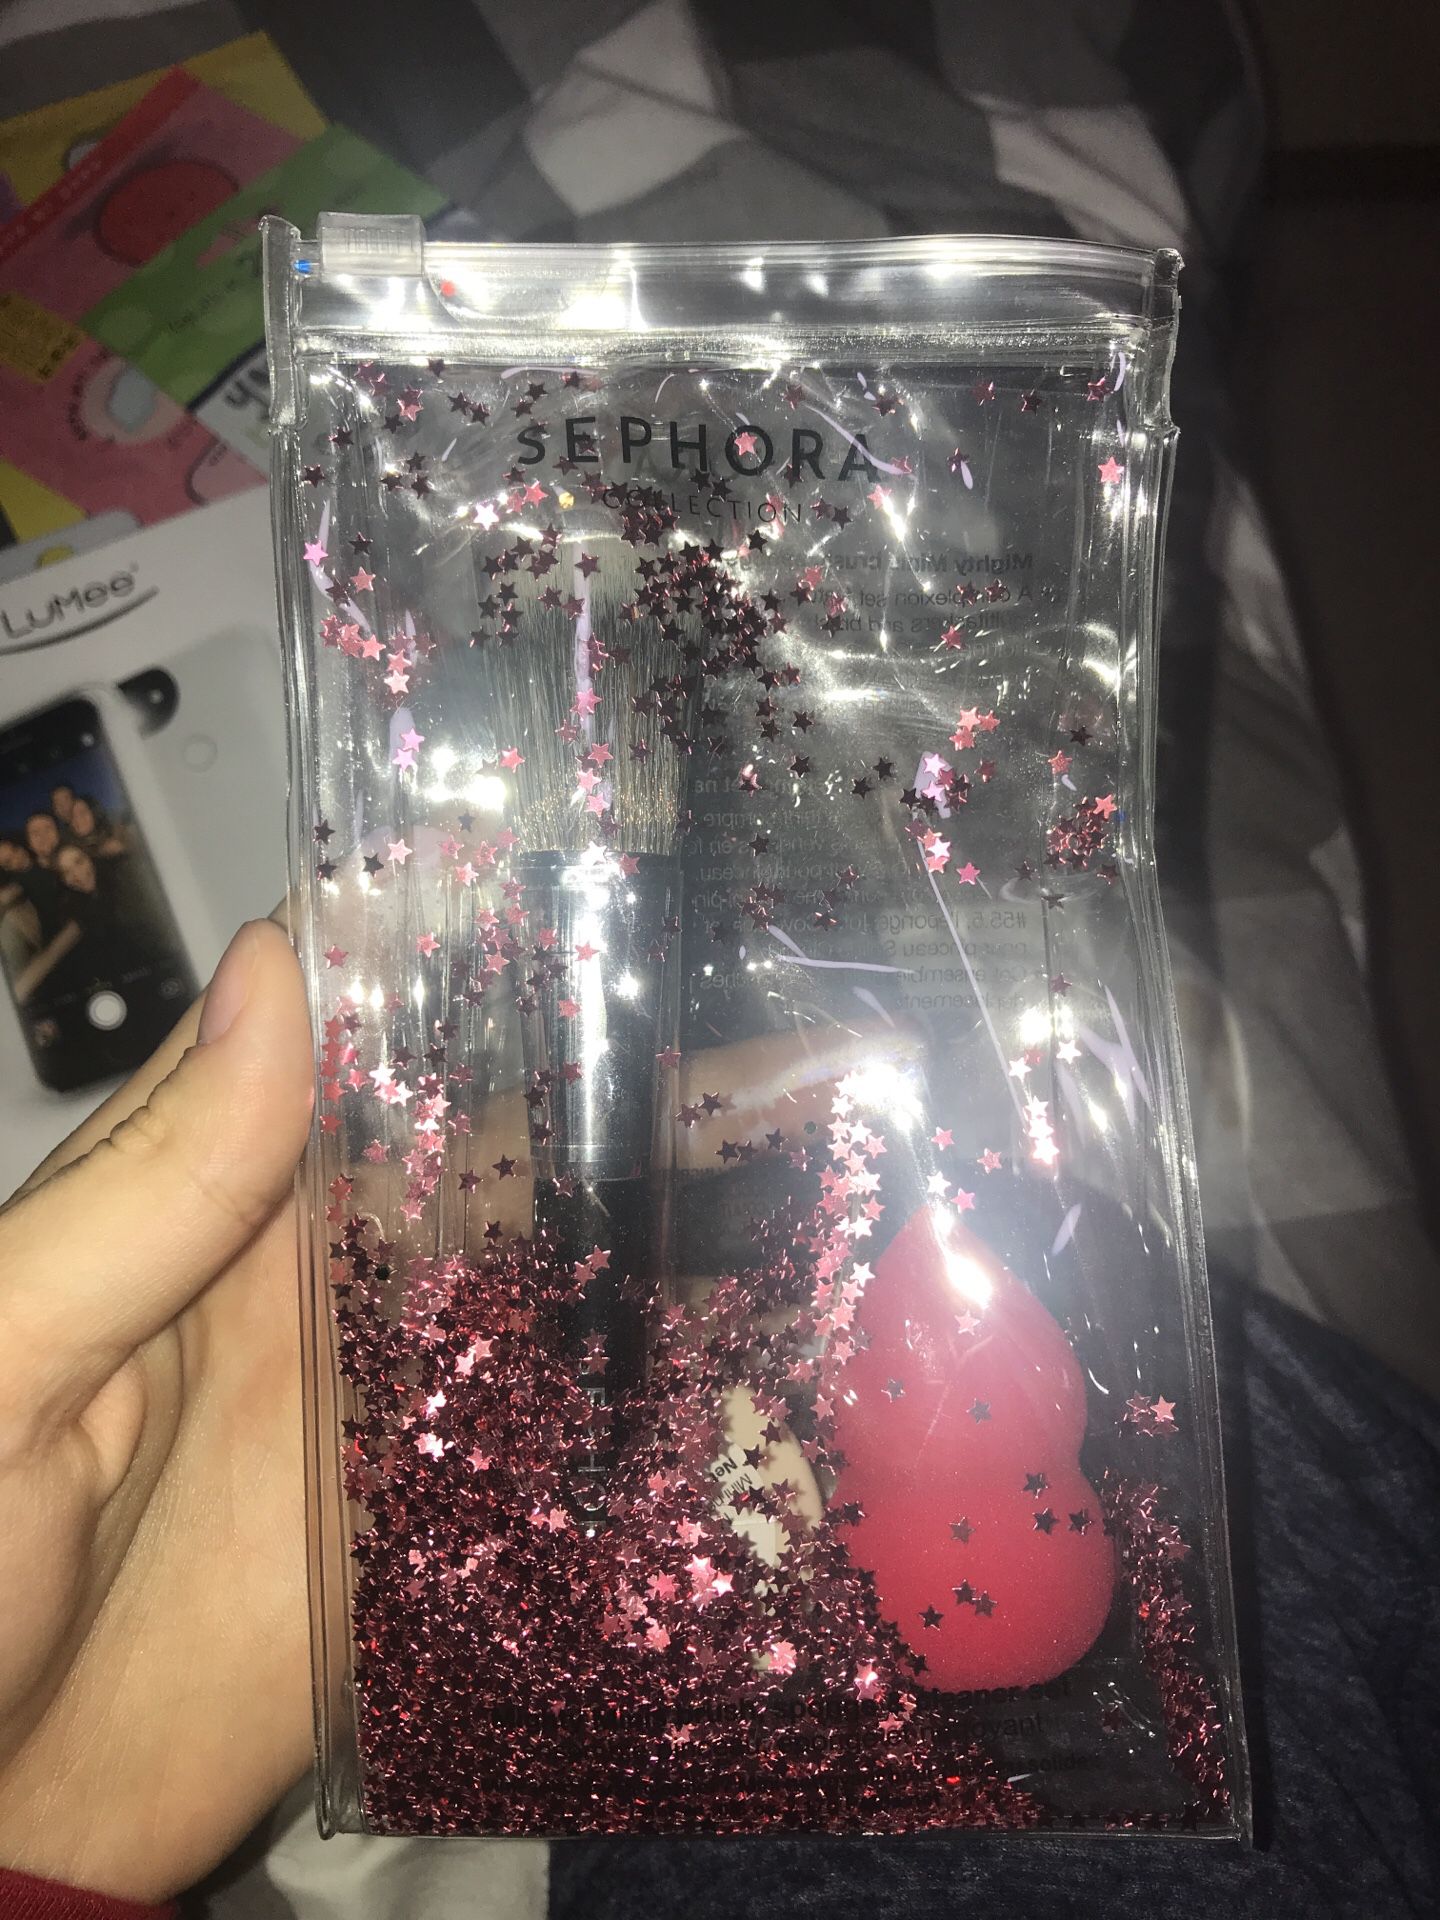 Makeup brush and beauty blender by Sephora